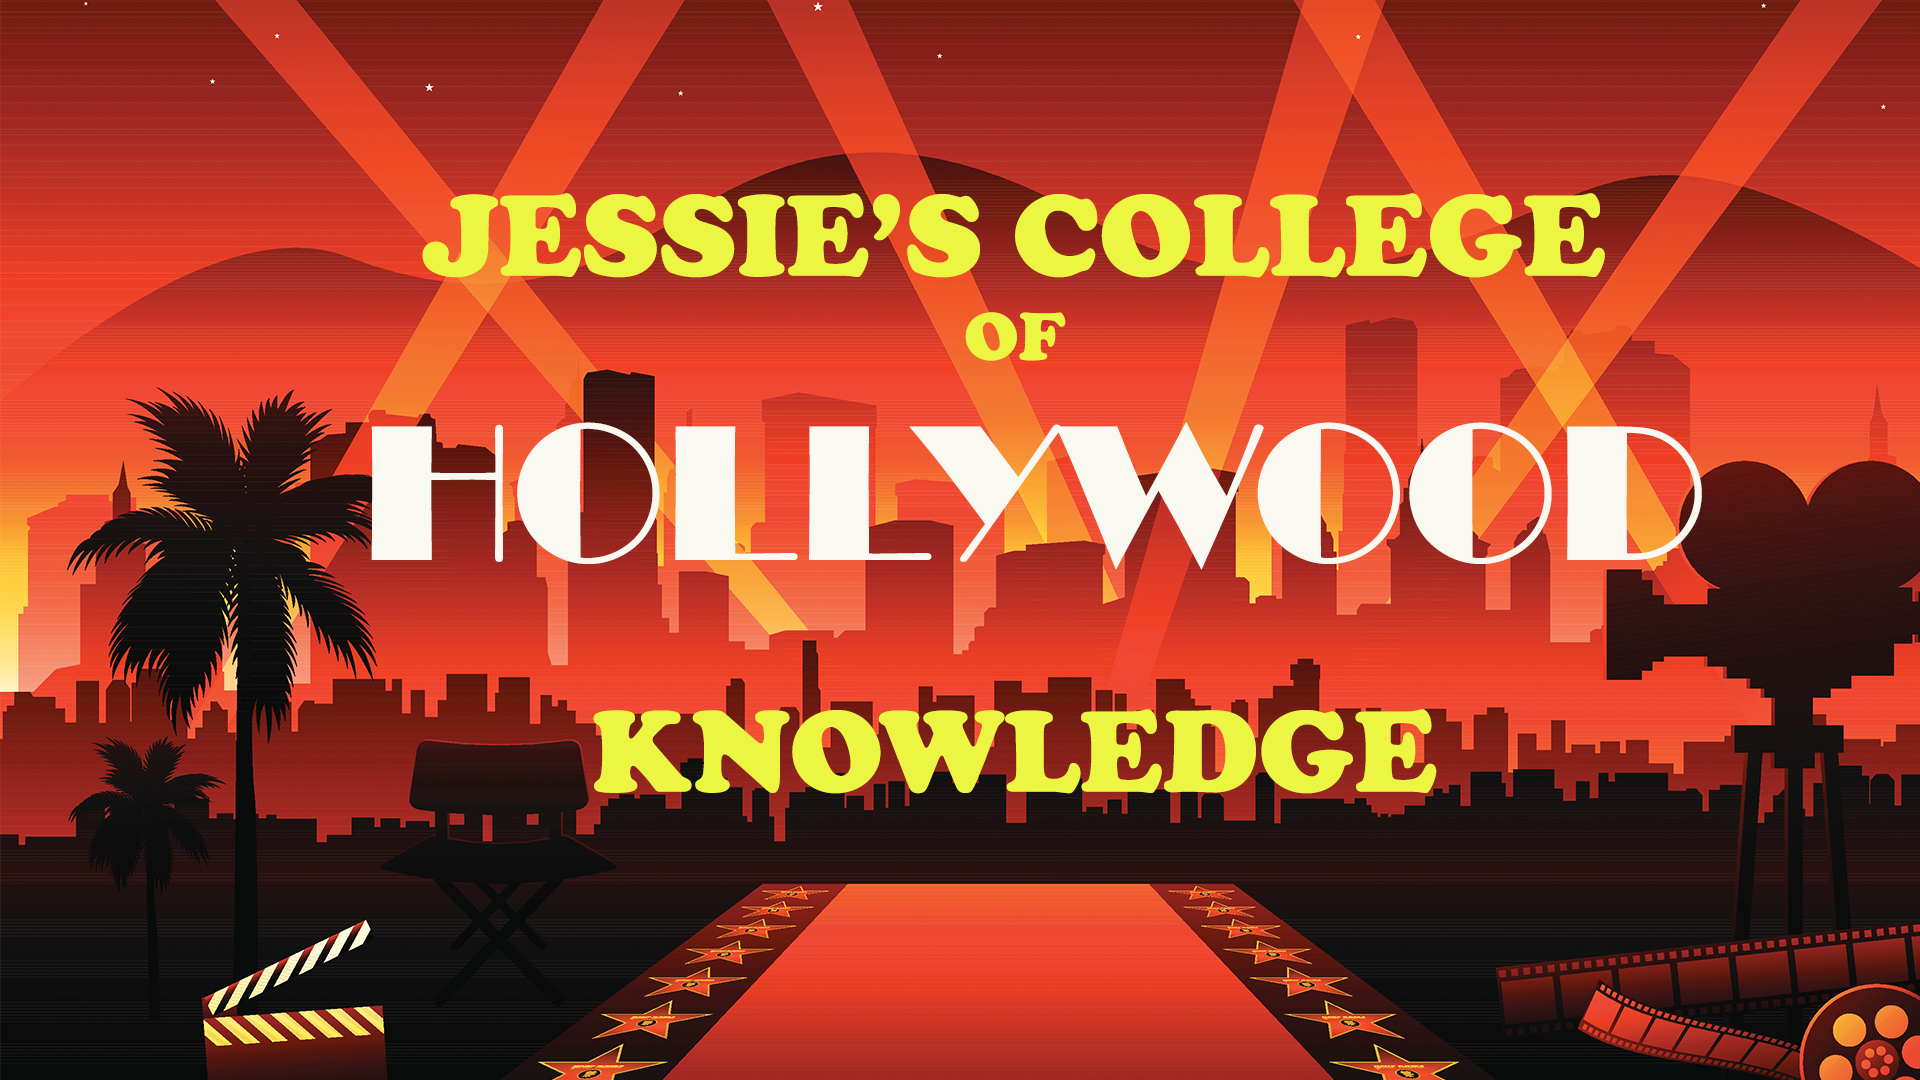 4/17/2024 7:40AM Jessie's College of Hollywood Knowledge